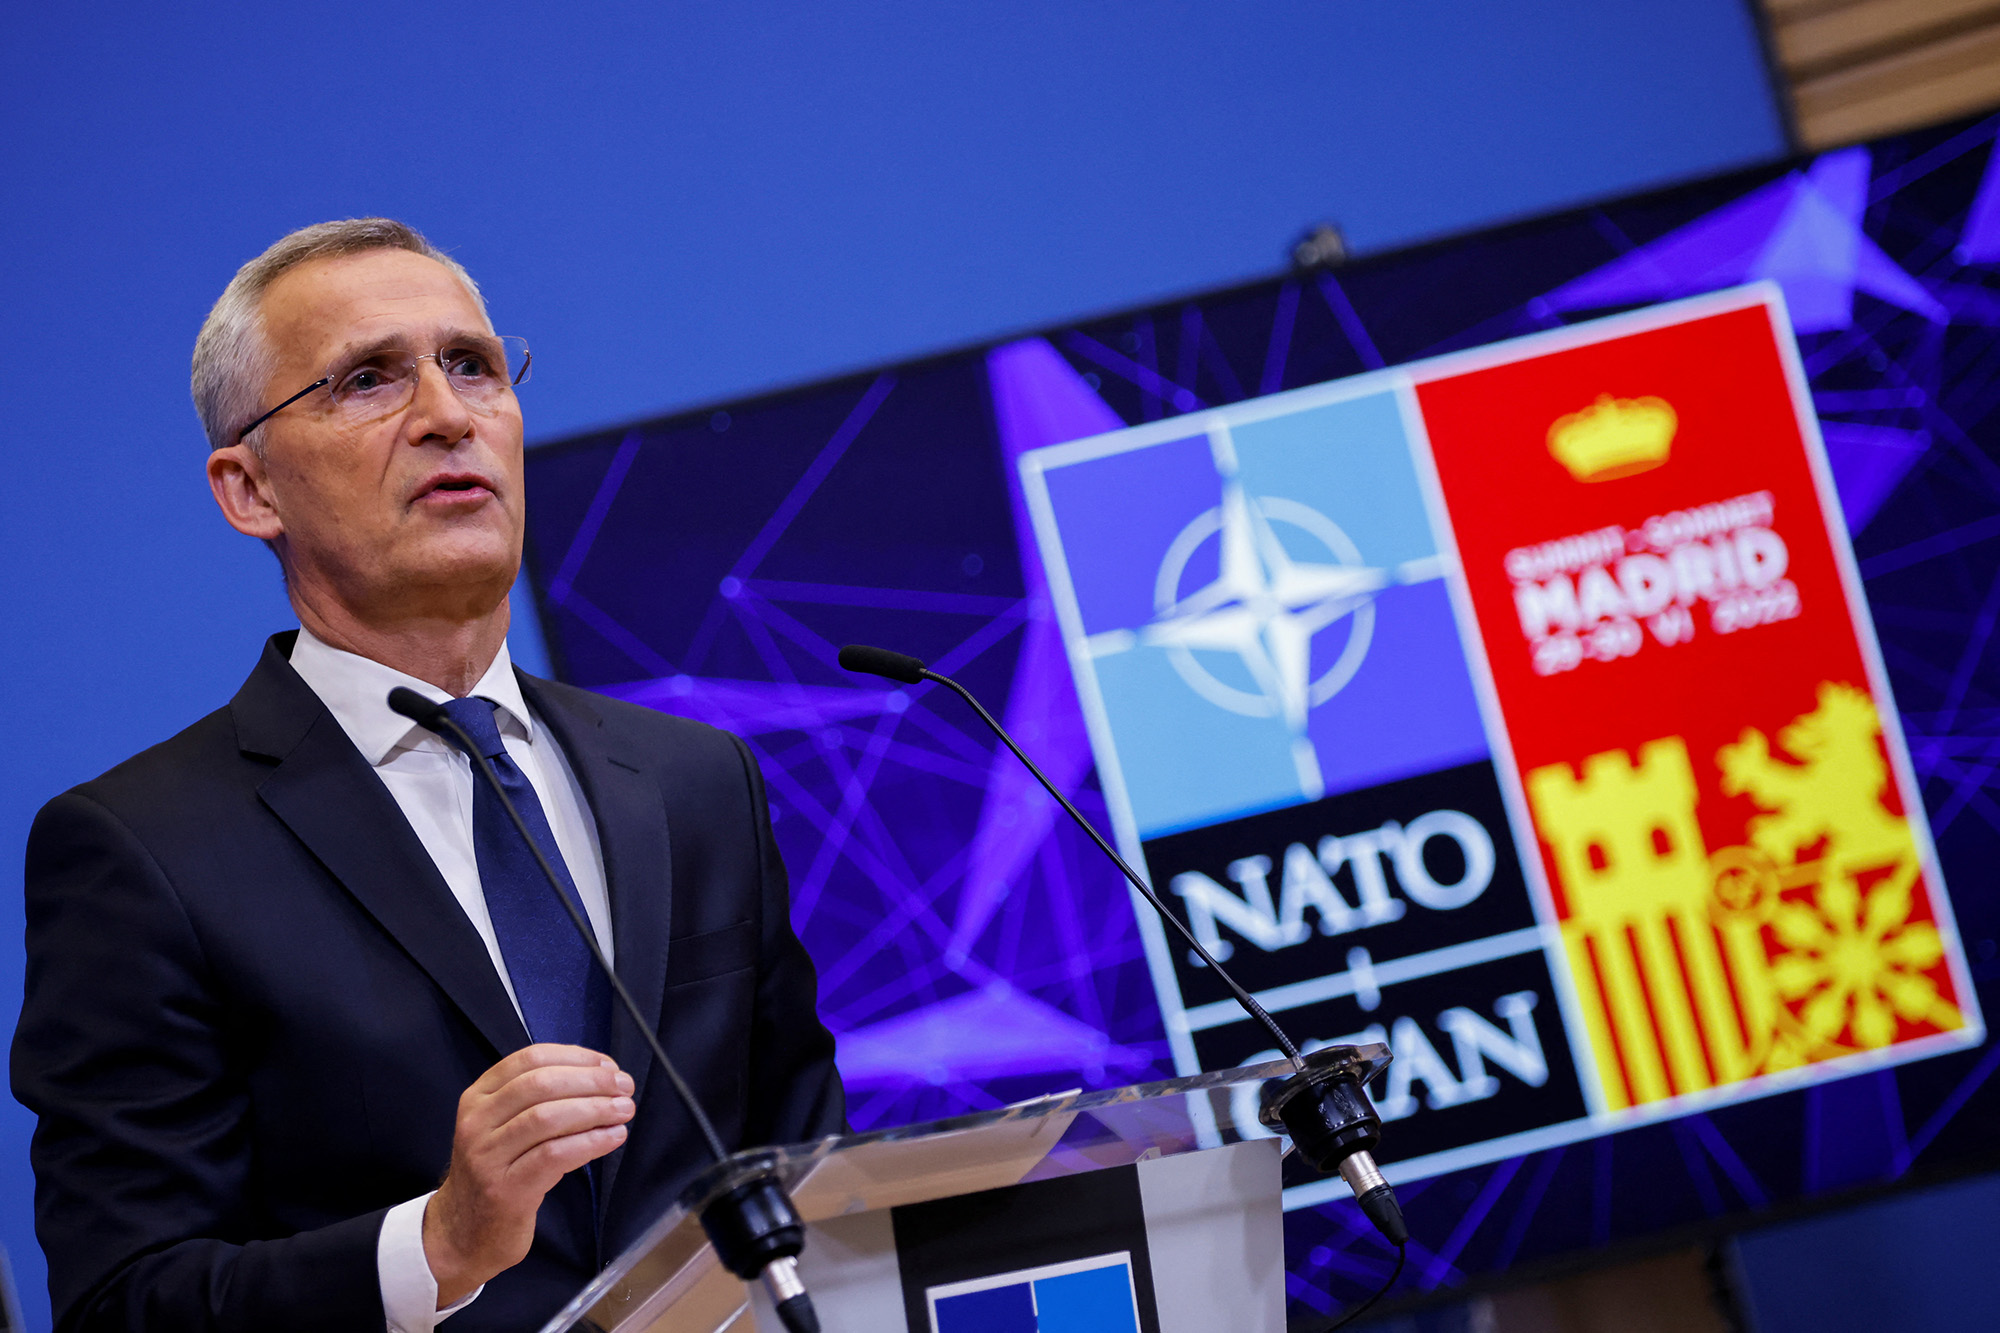 NATO Secretary General Jens Stoltenberg speaks during a news conference at the Alliance's headquarters in Brussels, Belgium, on June 27.